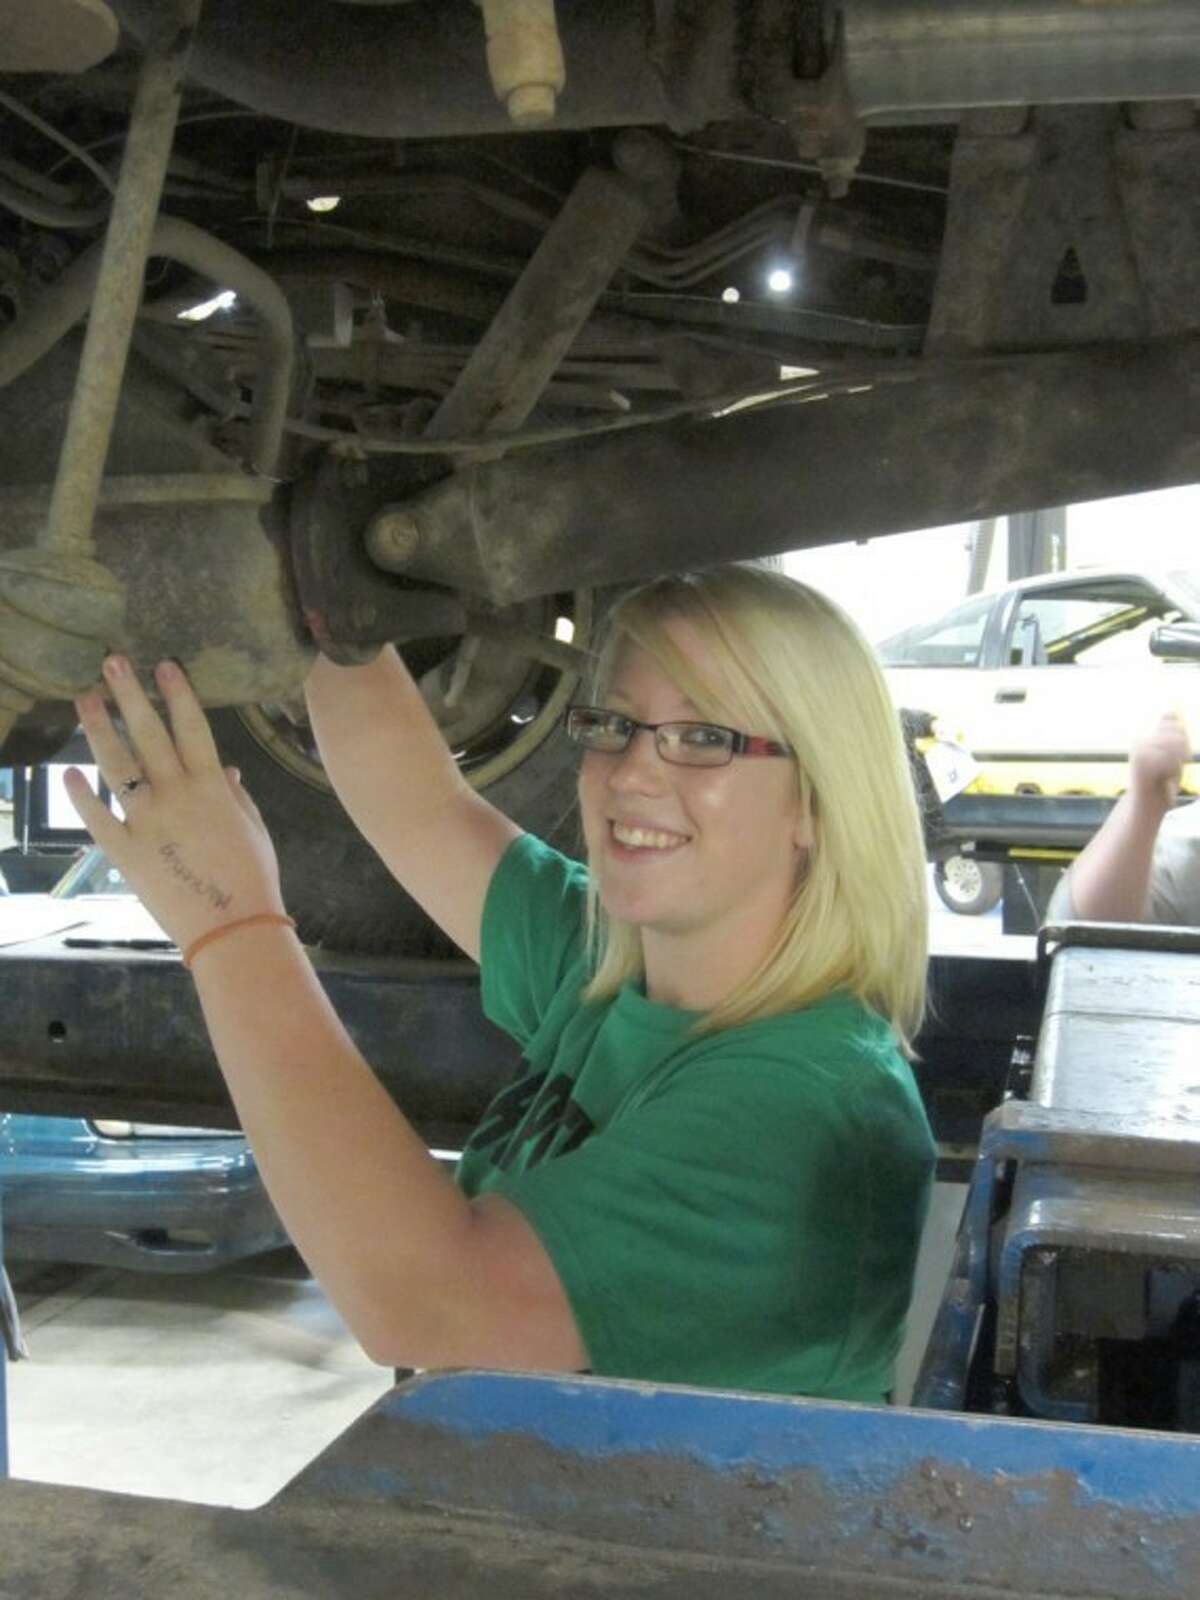 Photo providedKristin Keen, a 2012 Gladwin High School graduate, is the first female in the automotive technology class to earn mechanic repair certification.